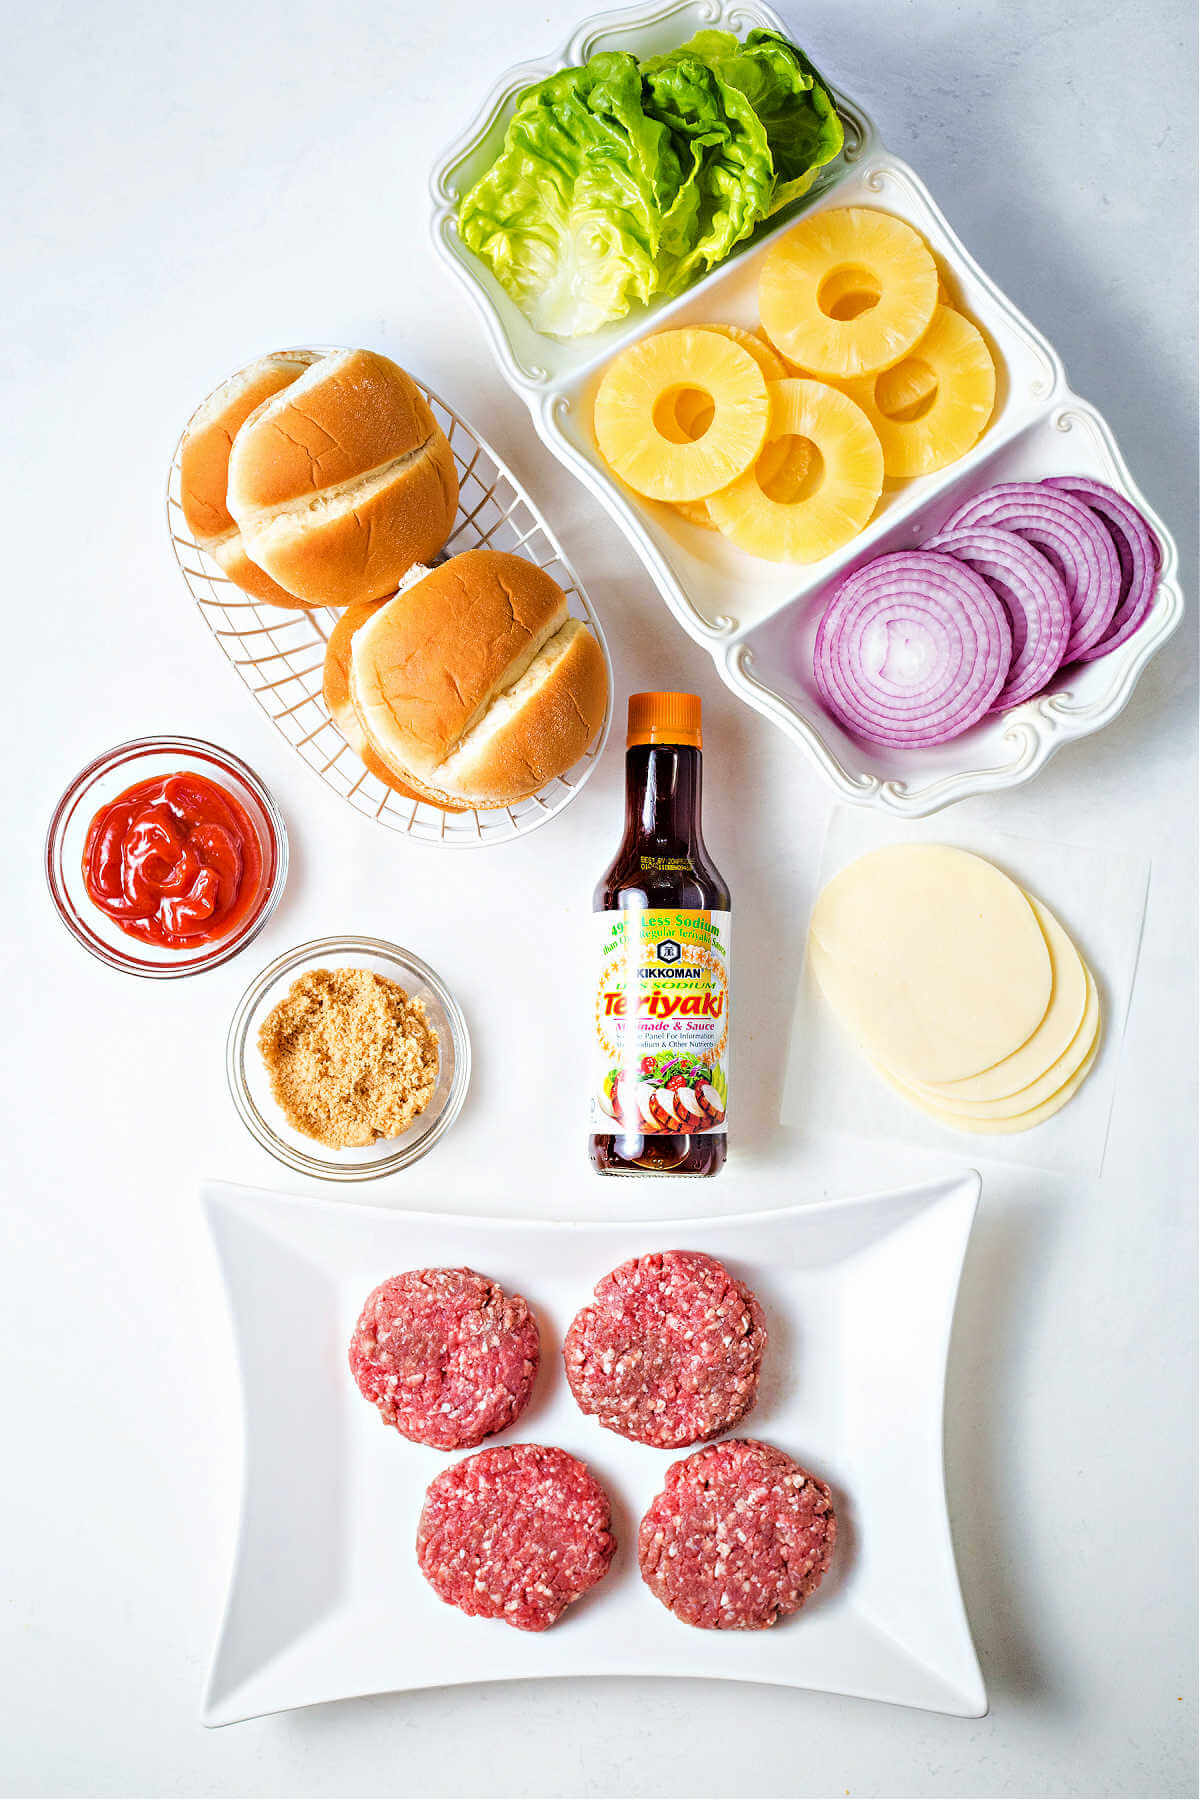 ingredients for making hawaiian burger on a table.